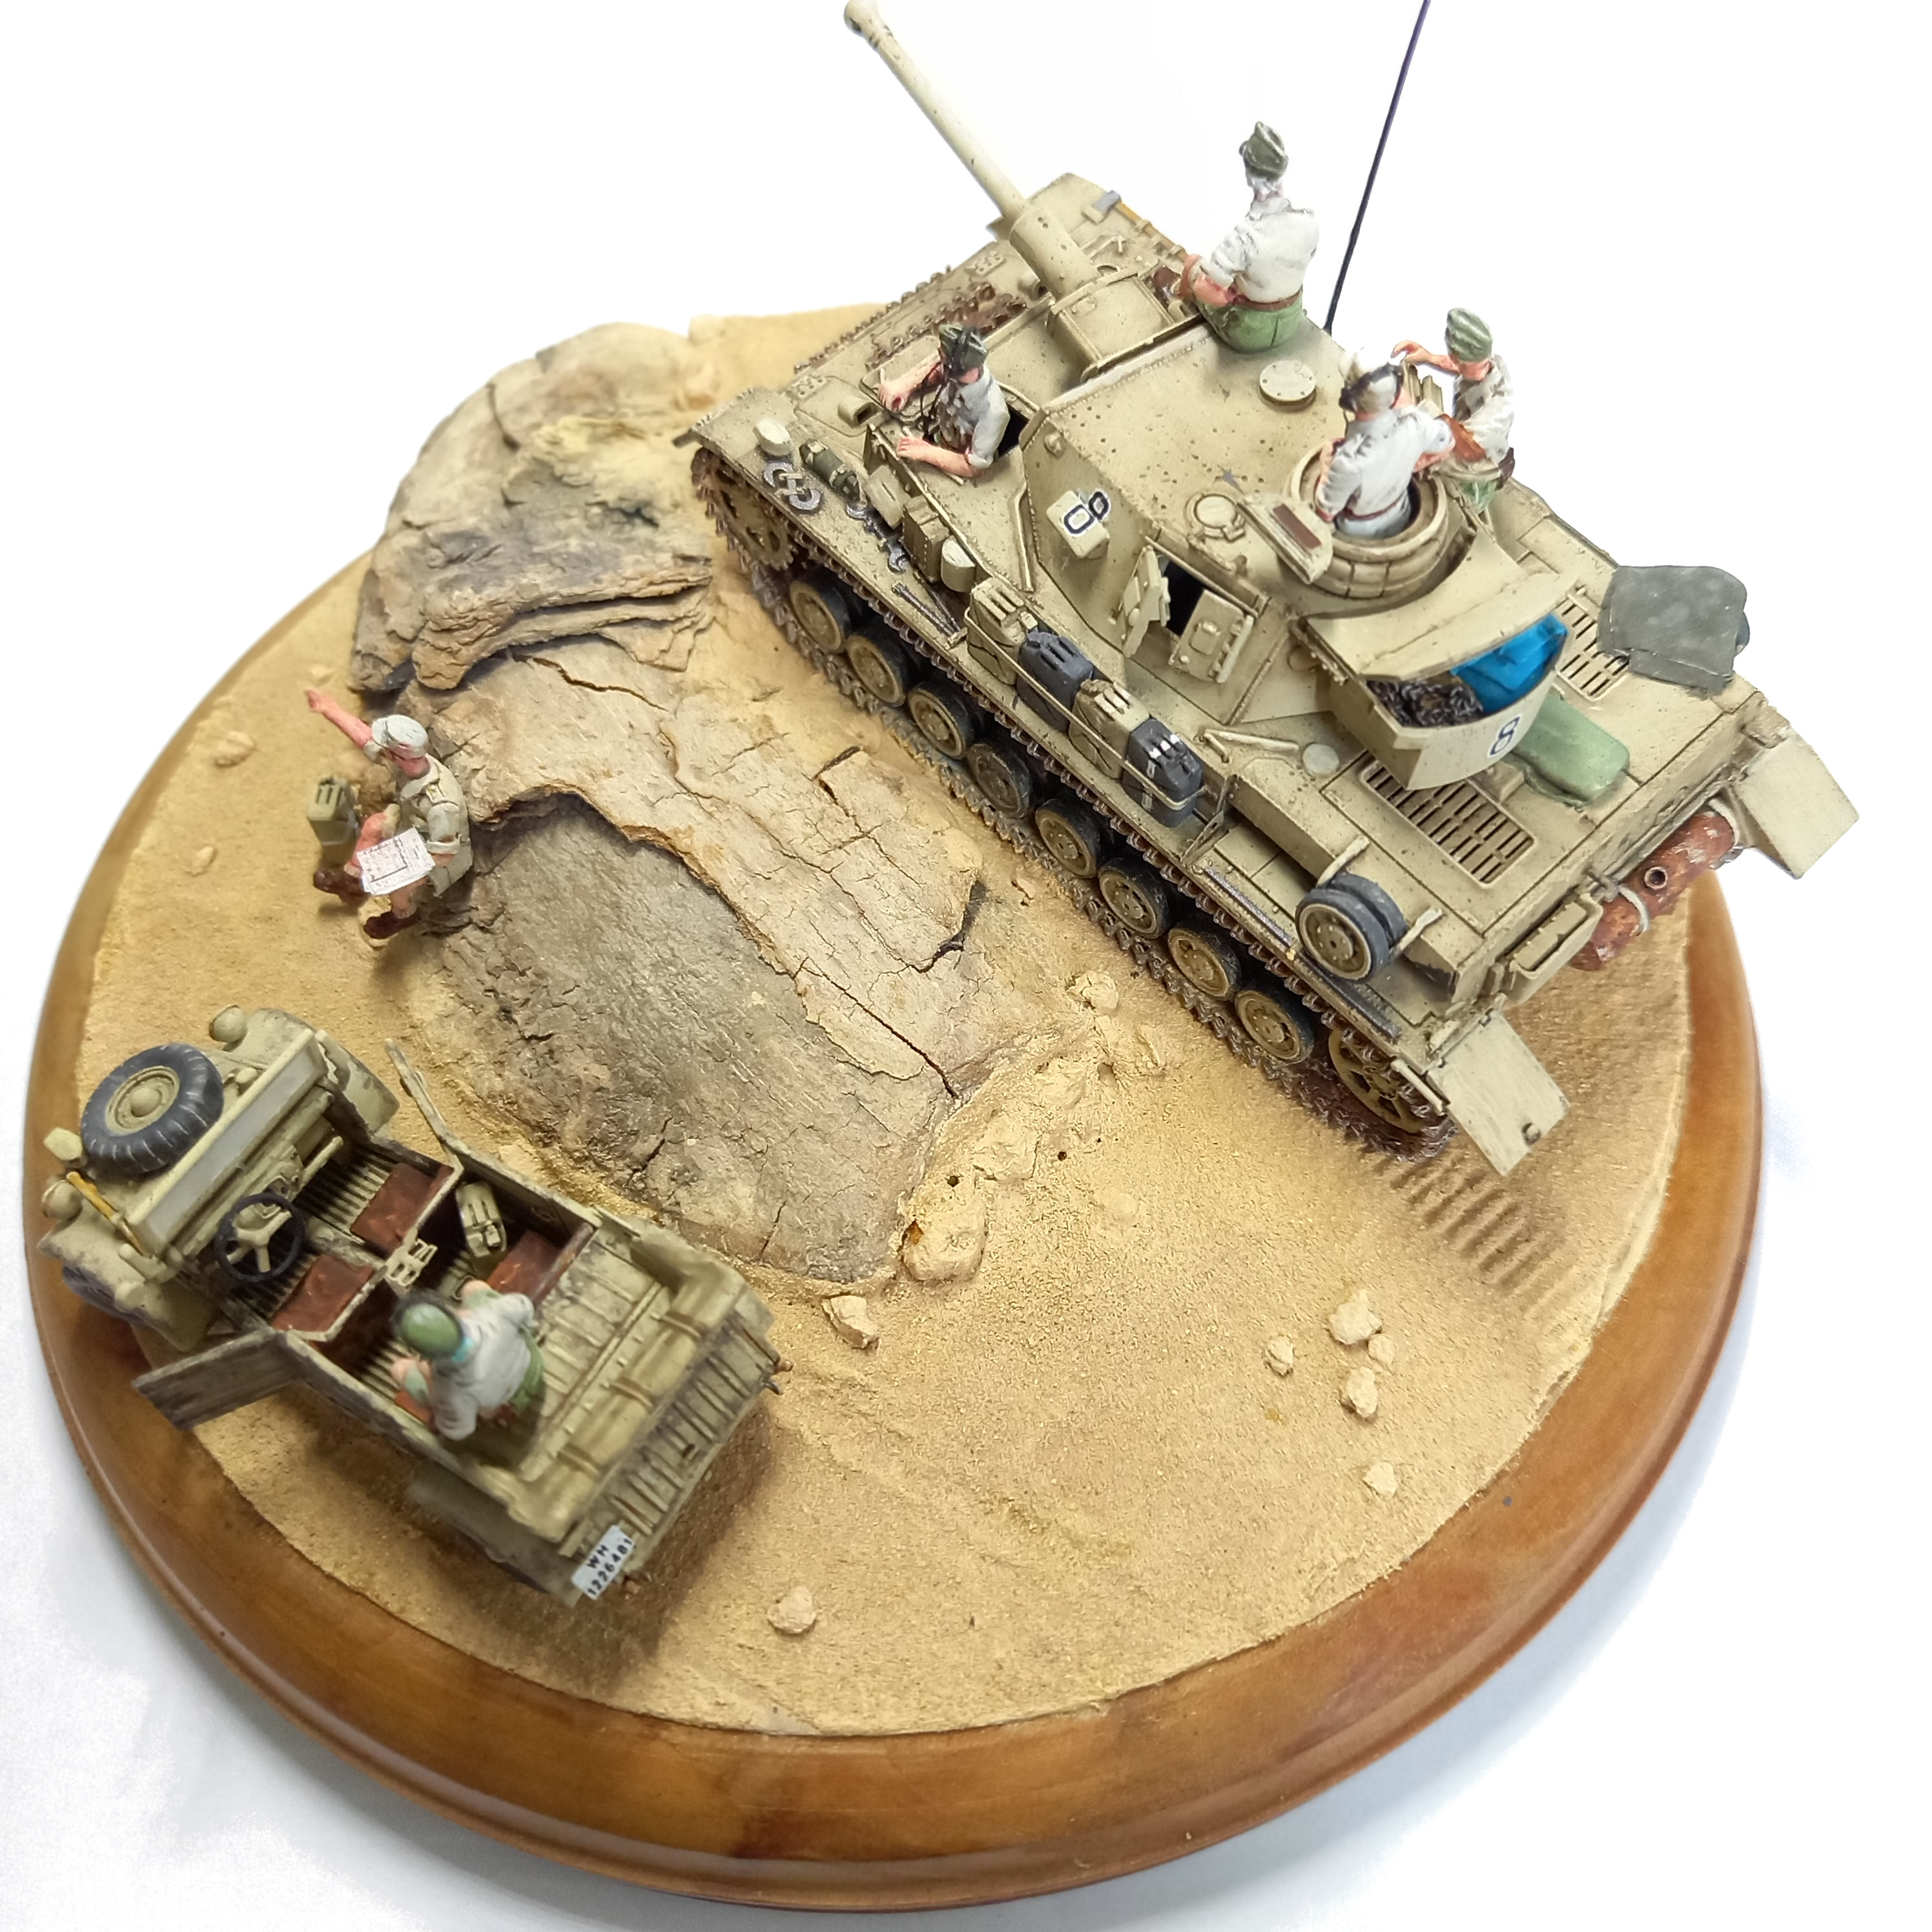 [GB Afrique] Panzer IV F2 [TERMINE] - Page 2 20230912_182501